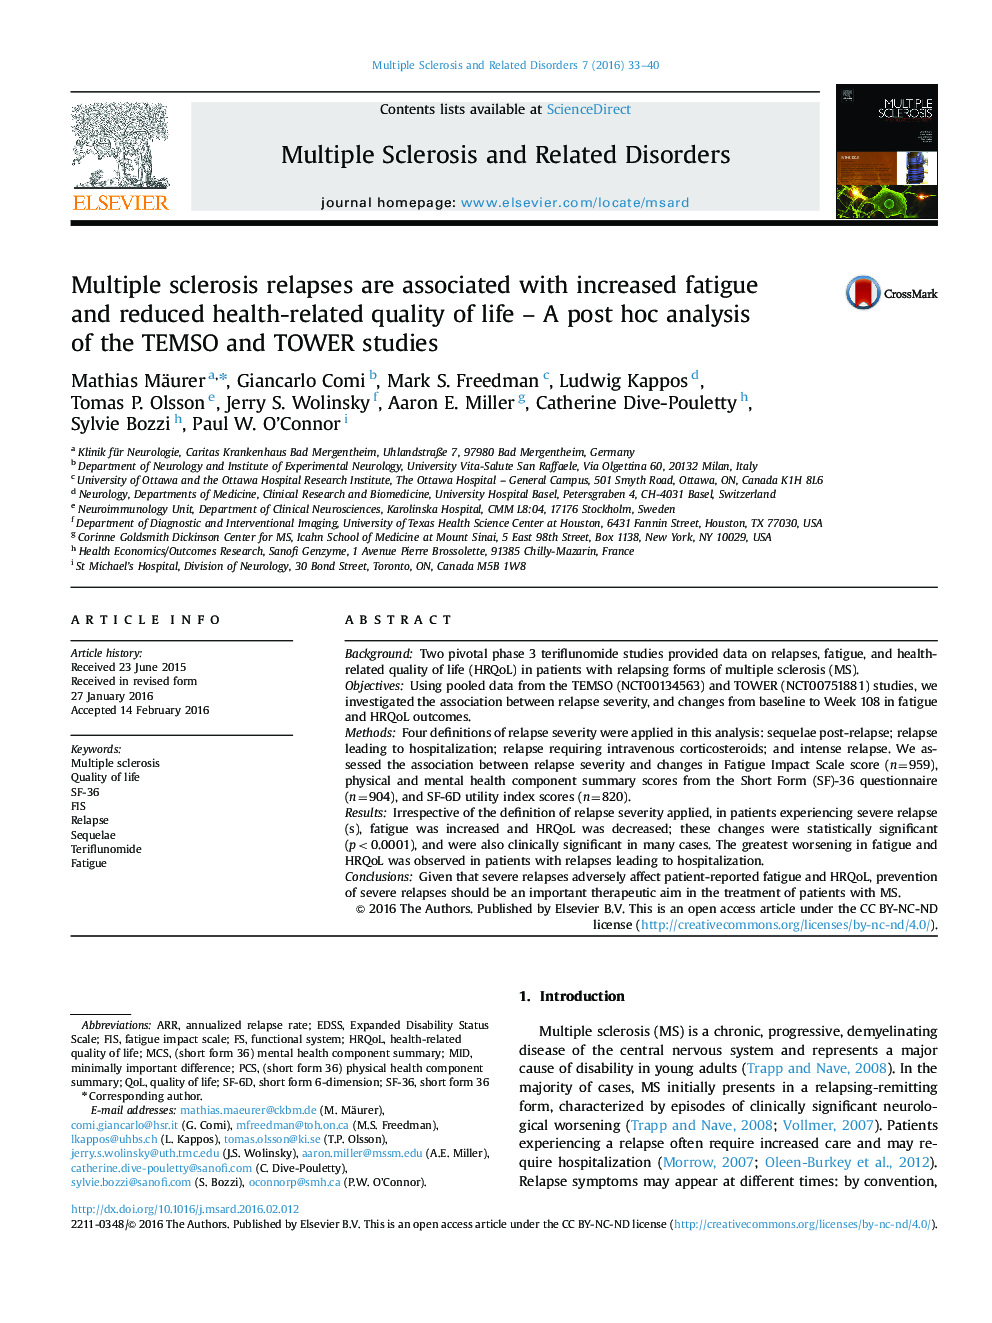 Multiple sclerosis relapses are associated with increased fatigue and reduced health-related quality of life - A post hoc analysis of the TEMSO and TOWER studies